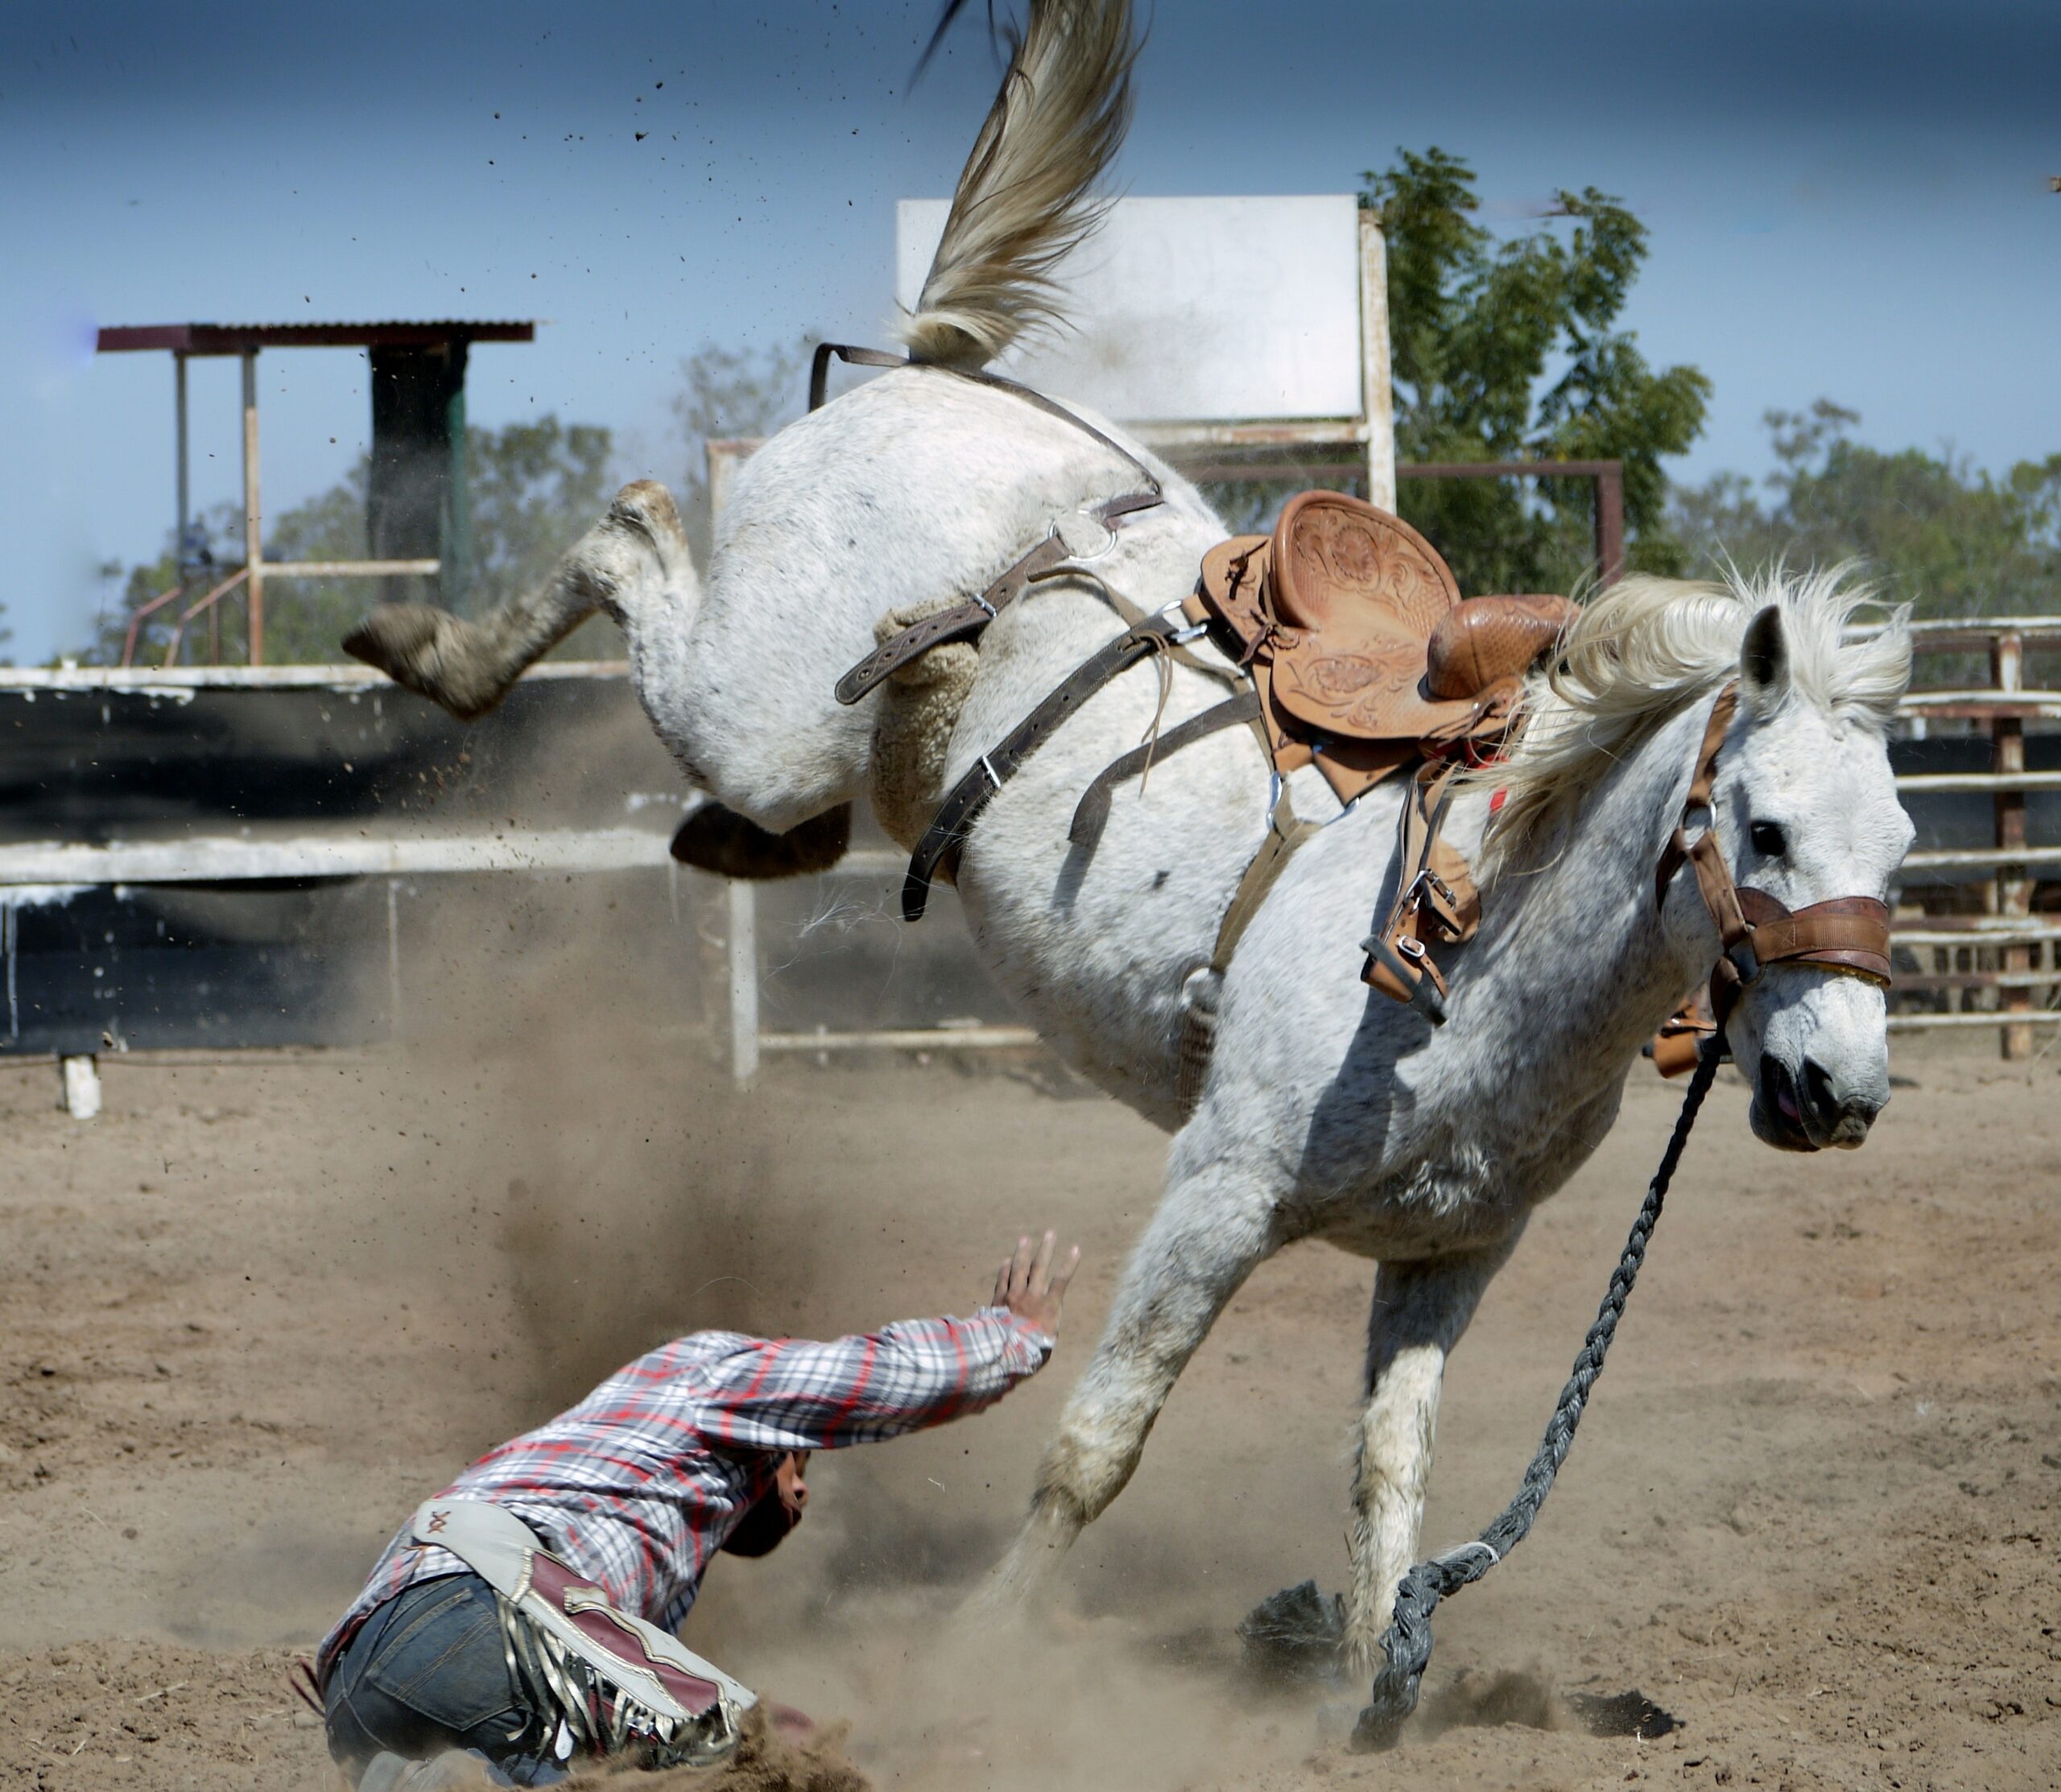 Does It Hurt to Get Bucked Off a Horse?